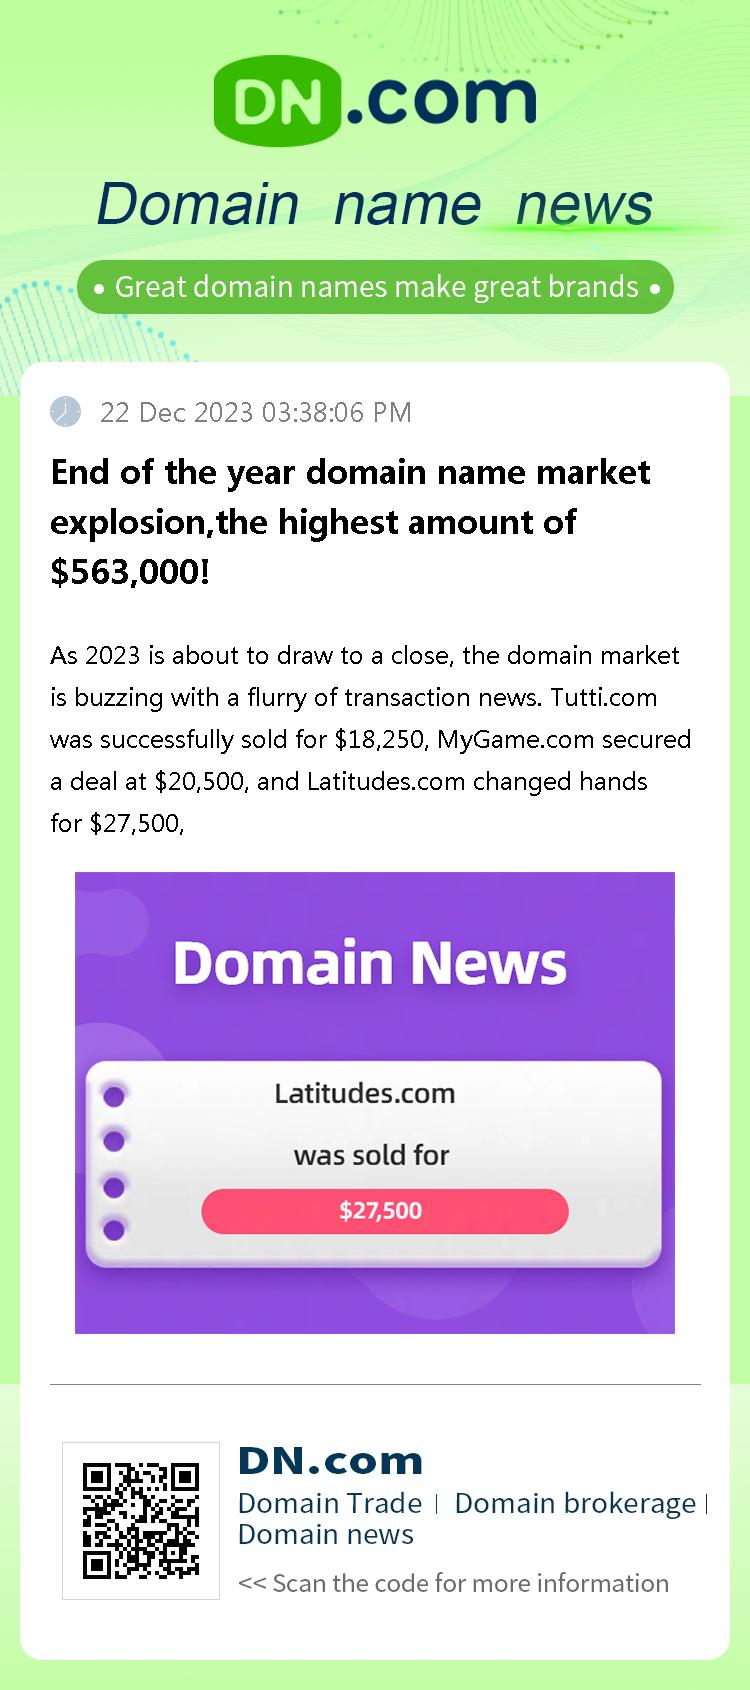 End of the year domain name market explosion,the highest amount of $563,000!